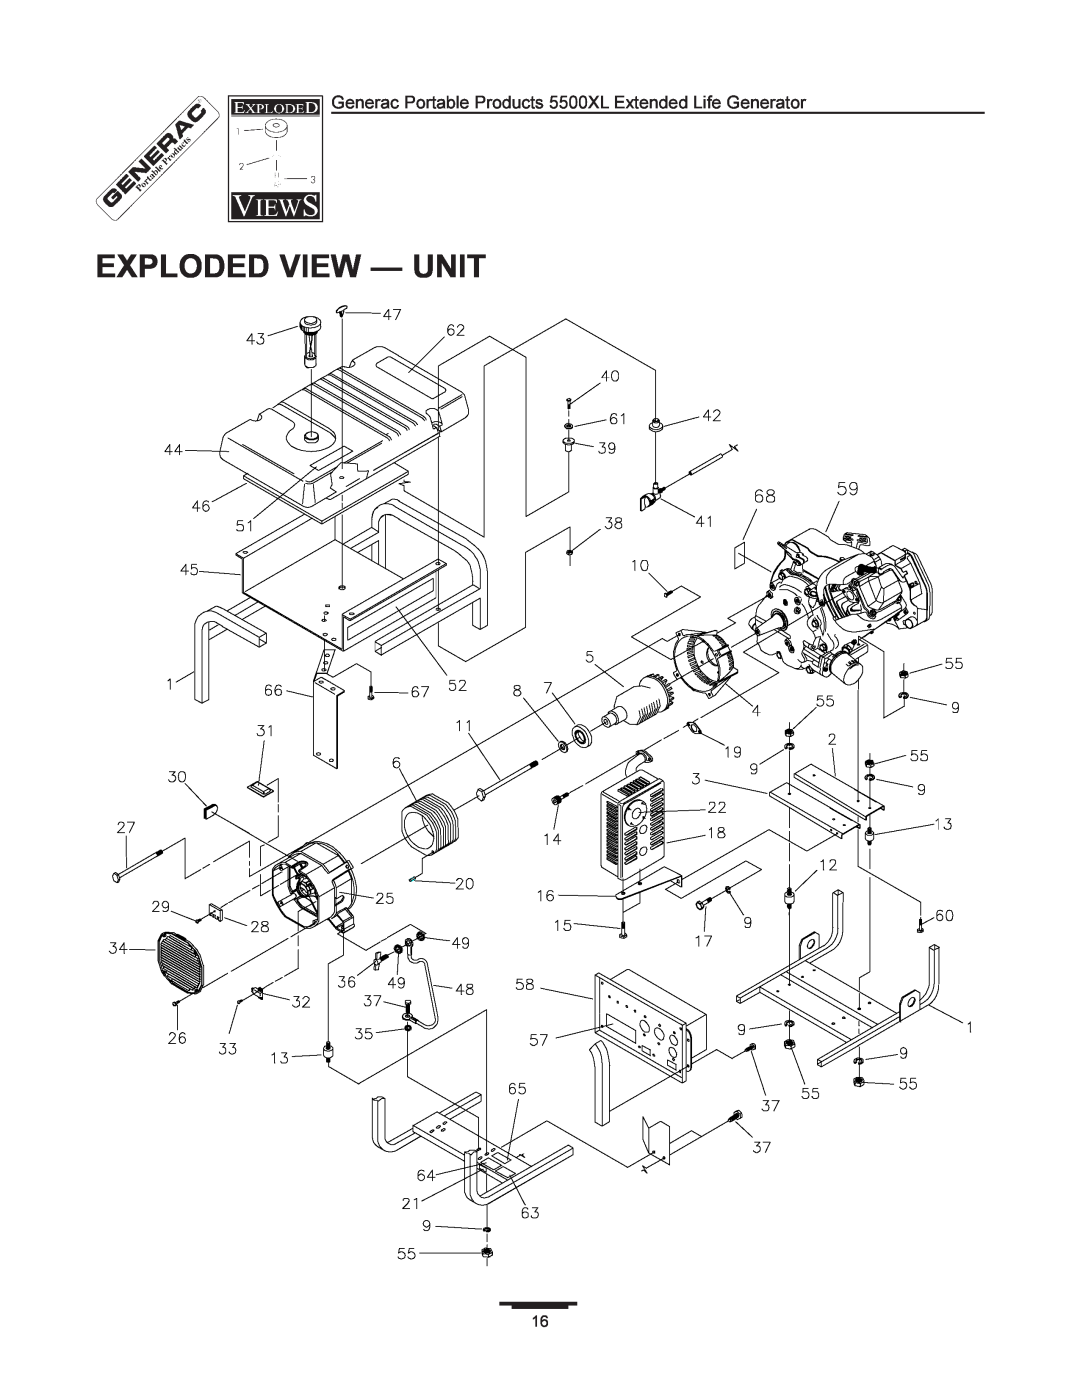 Generac manual Exploded View - Unit, Generac Portable Products 5500XL Extended Life Generator 